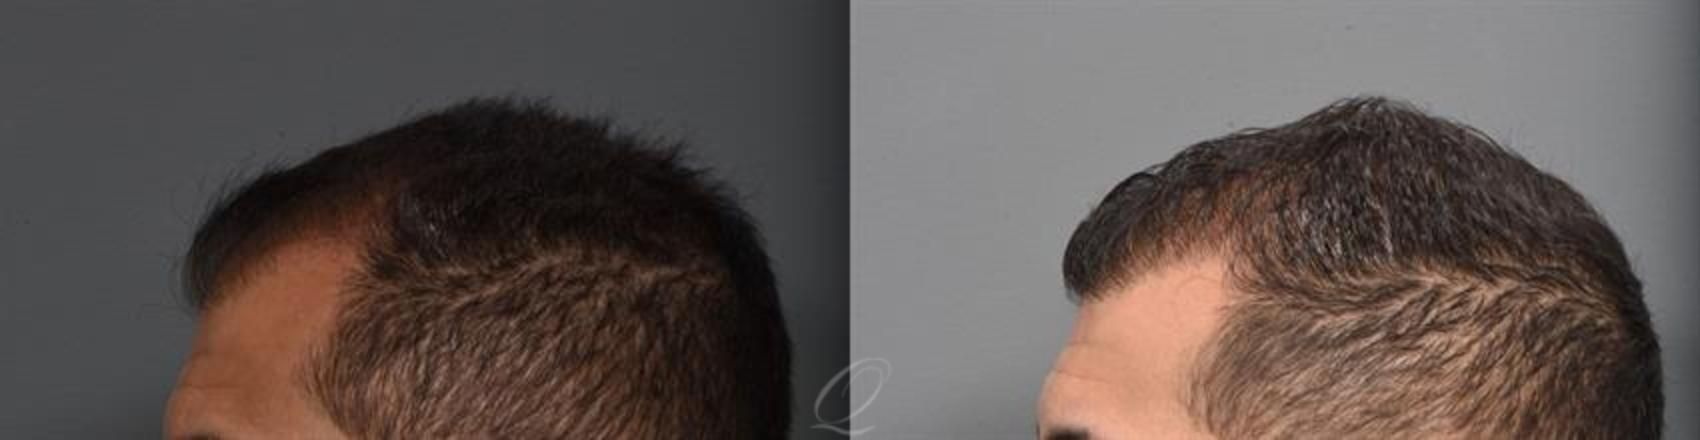 Male FUE Hair Transplant Case 389 Before & After Left Side | Rochester, Buffalo, & Syracuse, NY | Quatela Center for Hair Restoration